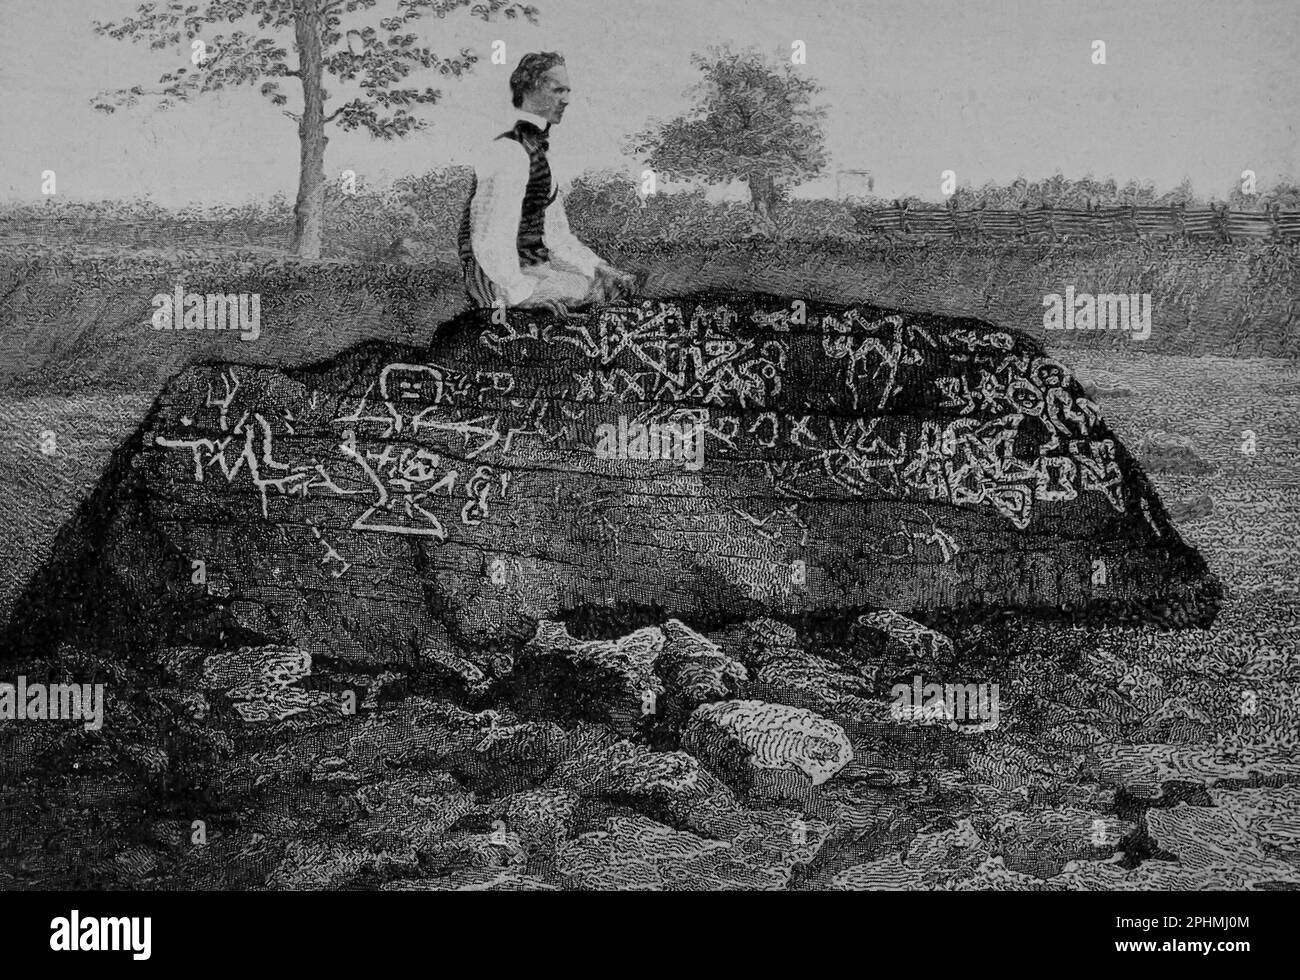 Indian Symbols on Dighton Rock, Near Taunton, Mass from the book ' The Song of Hiawatha ' by Longfellow, Henry Wadsworth, 1807-1882 Publication date 1898 Publisher Chicago, S. C. Andrews Stock Photo